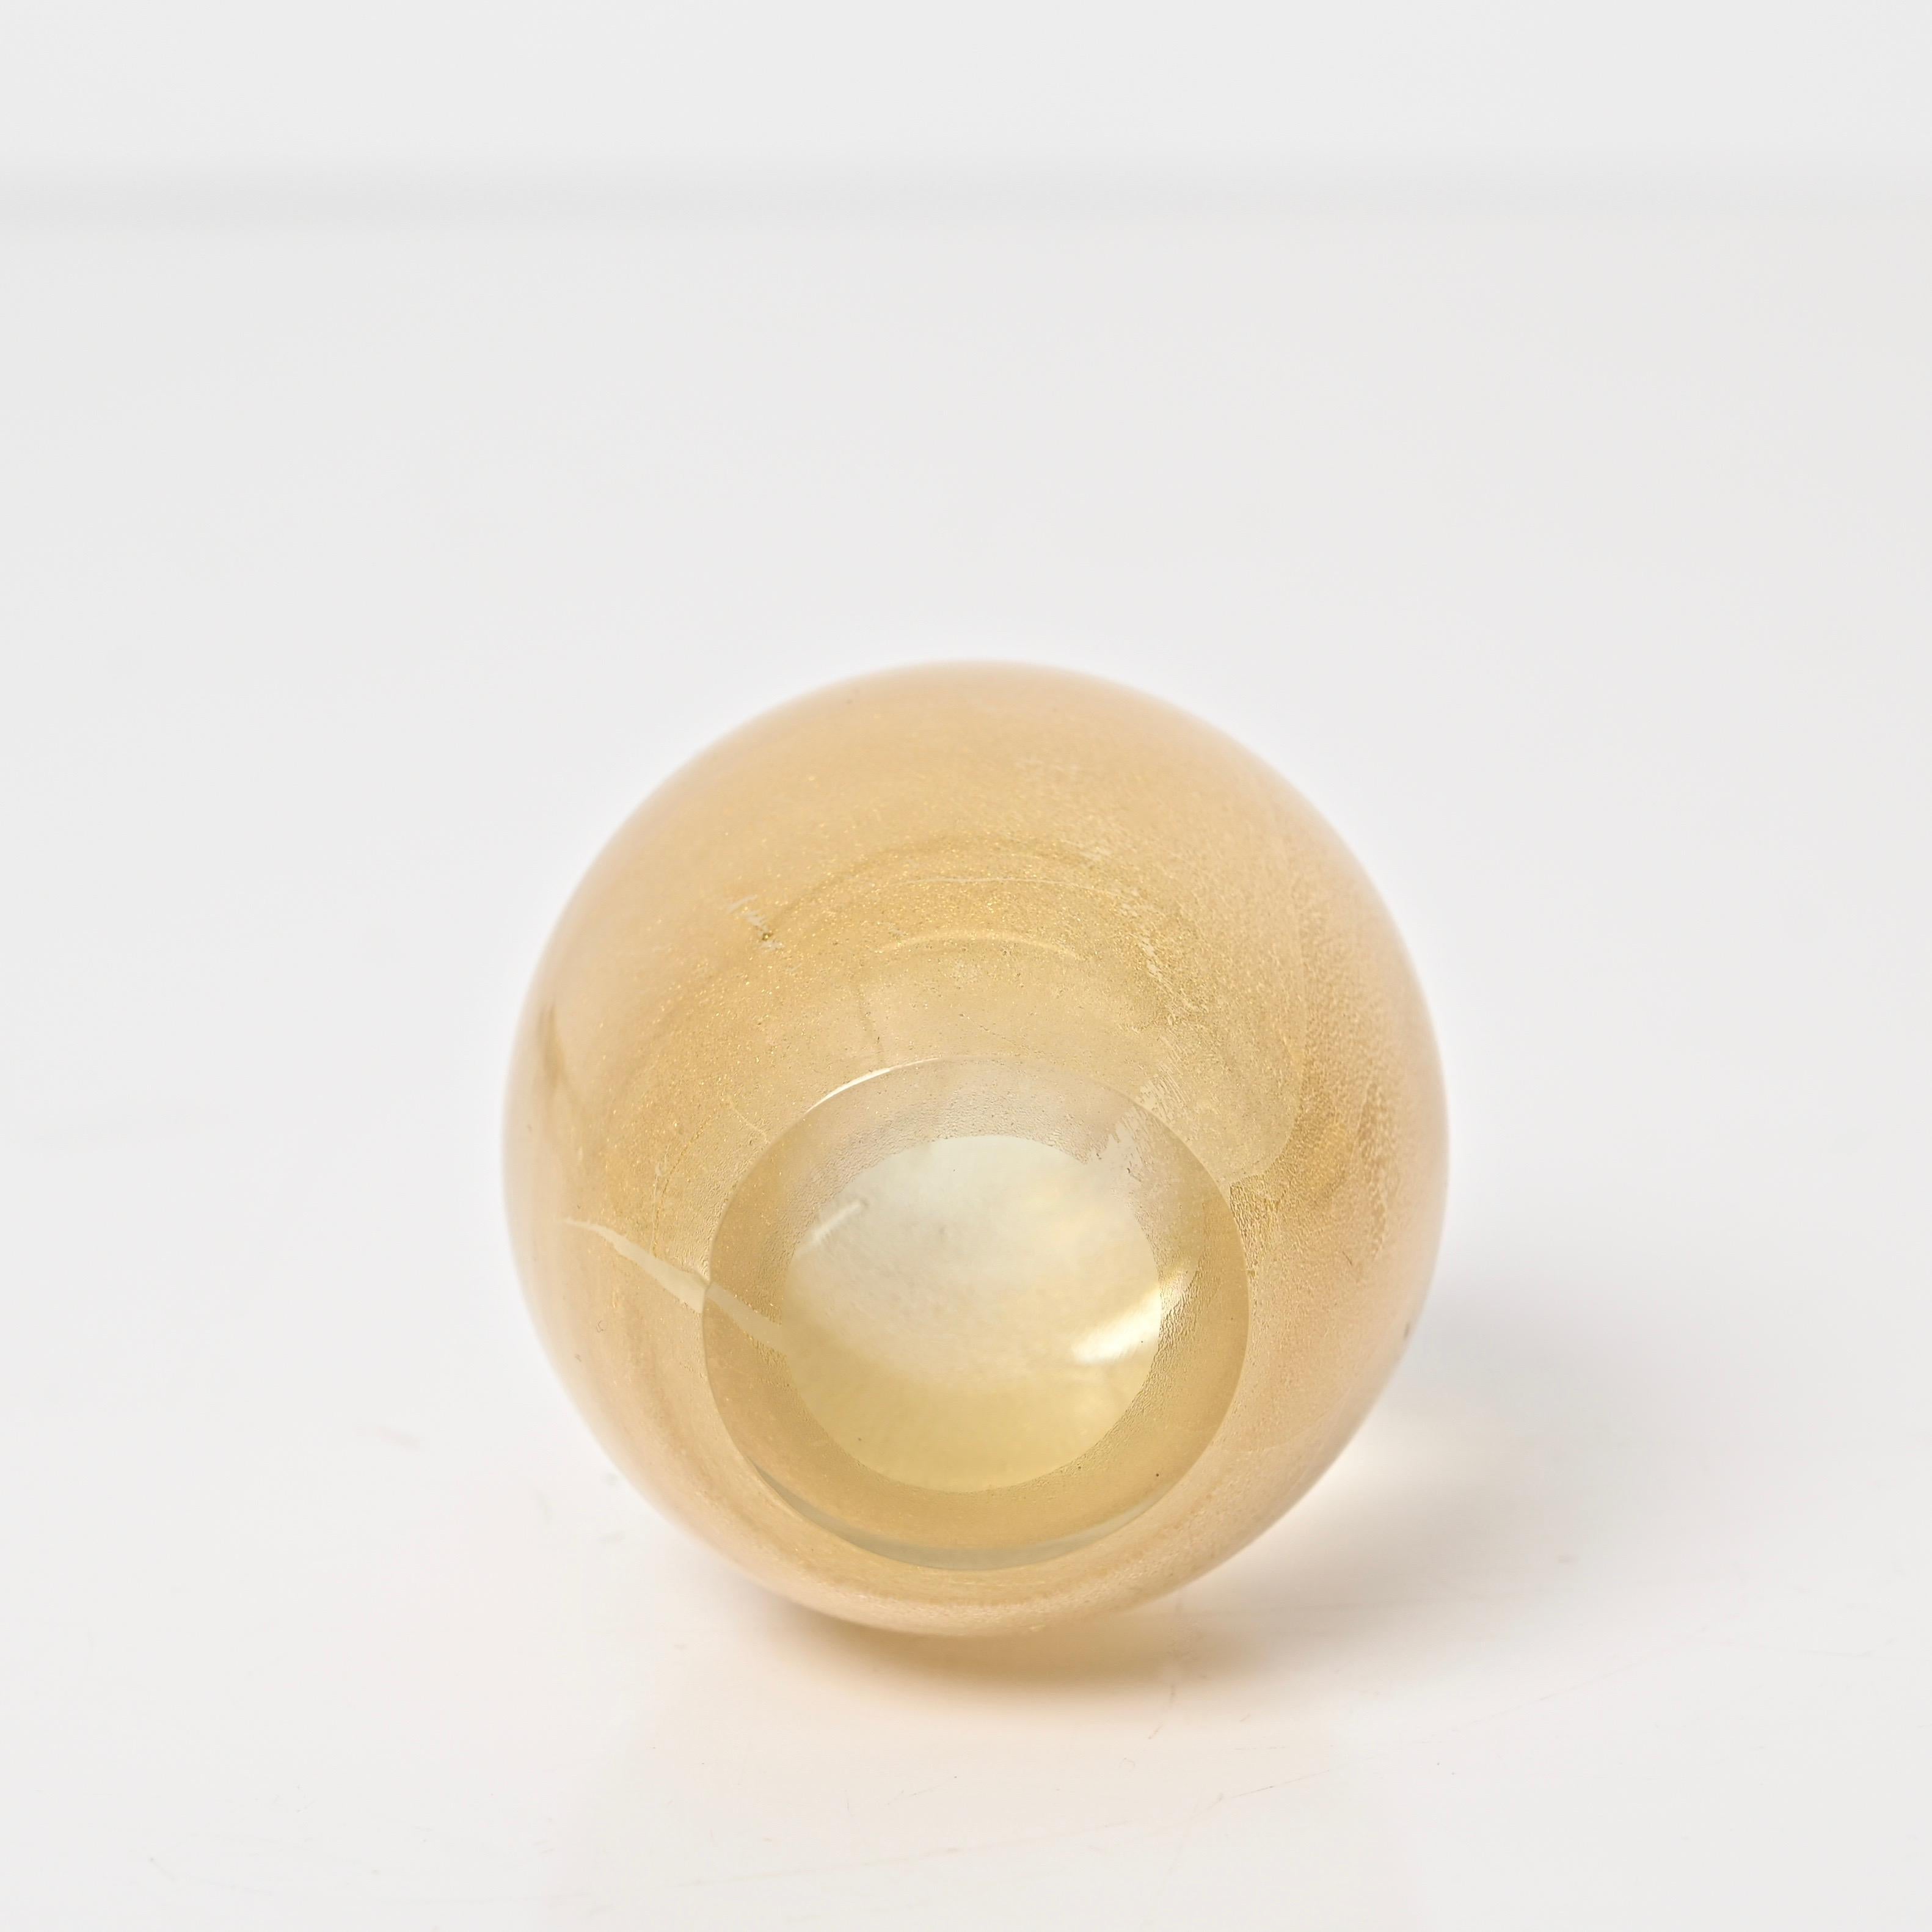 Seguso Murano Egg Paperweight in Murano Glass with Gold Dust, Italy 1950s For Sale 4